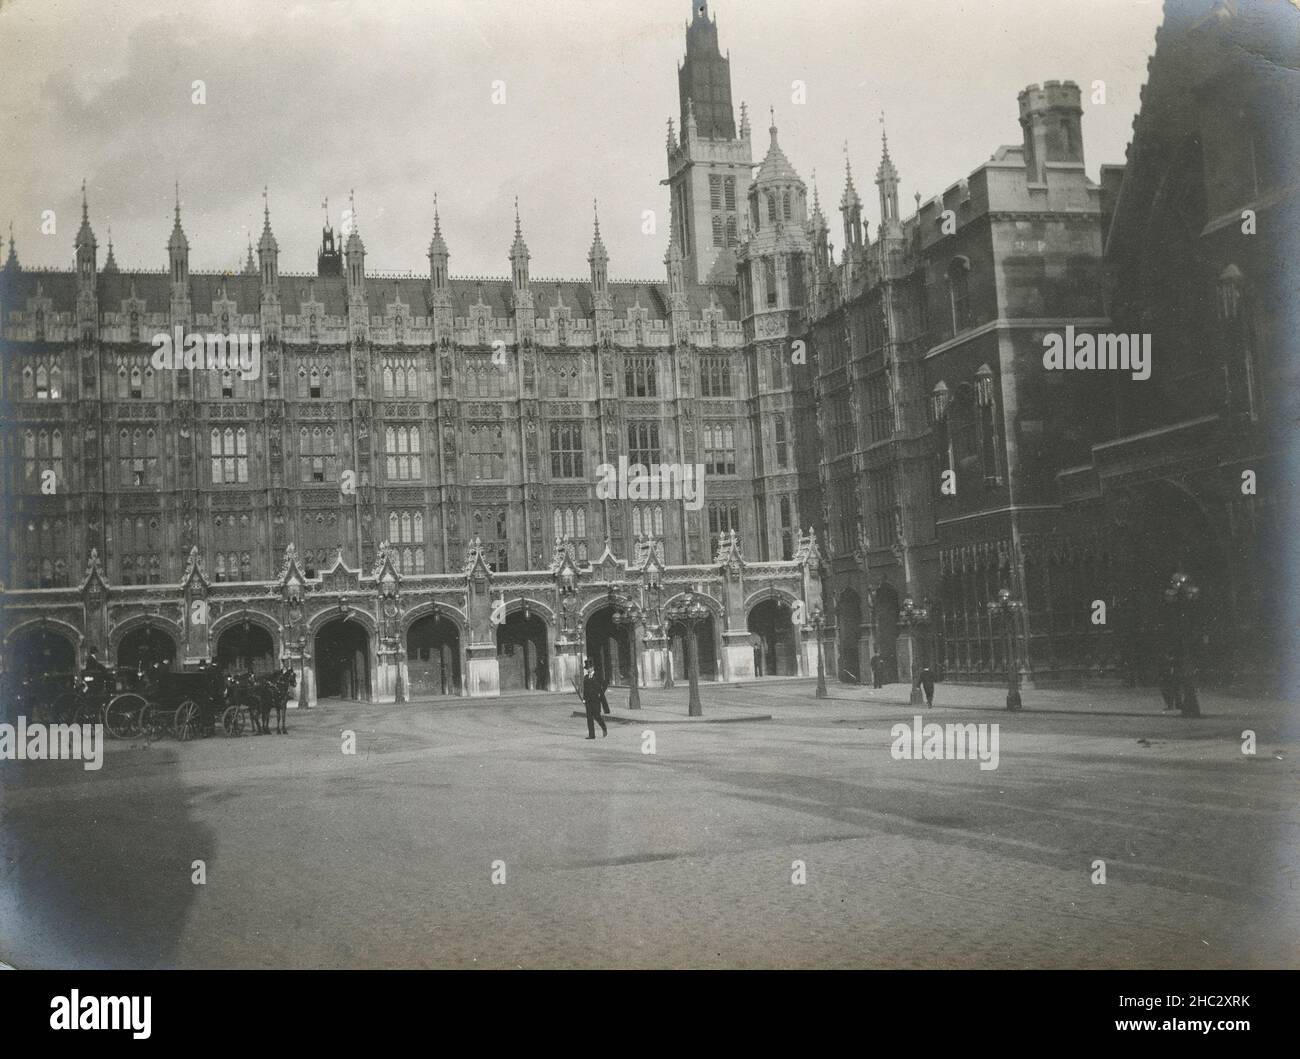 Antique c1900 photograph, Palace of Westminster and Westminster Hall from New Palace Yard in London, England. SOURCE: ORIGINAL PHOTOGRAPHIC PRINT Stock Photo